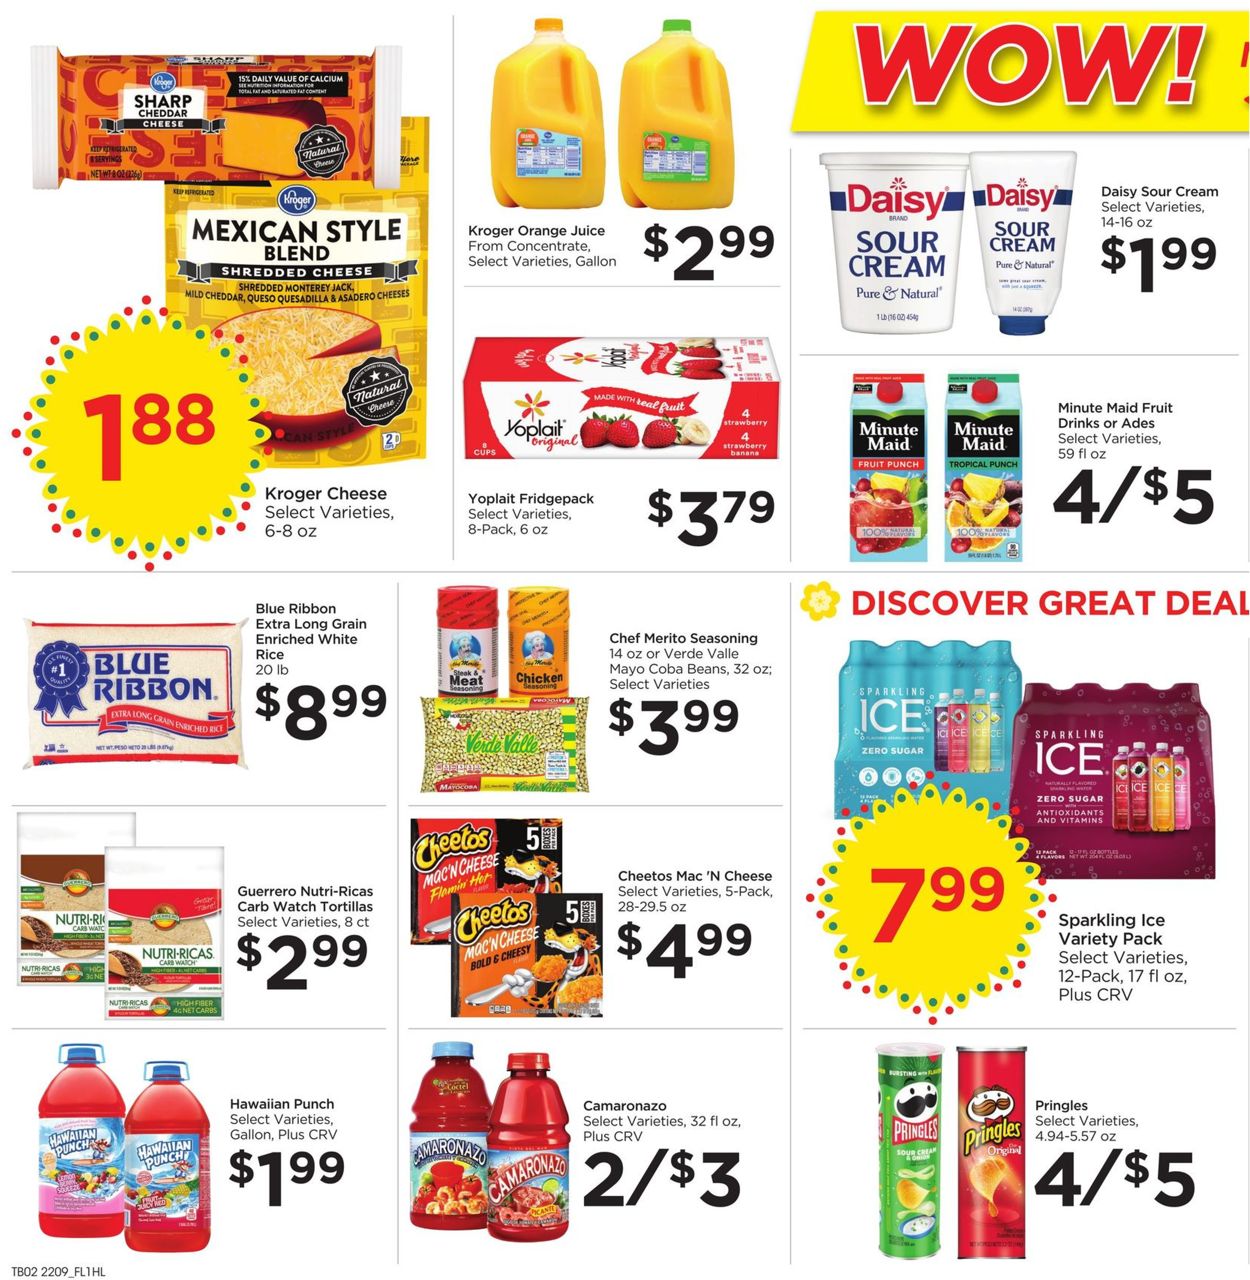 Catalogue Food 4 Less from 03/30/2022